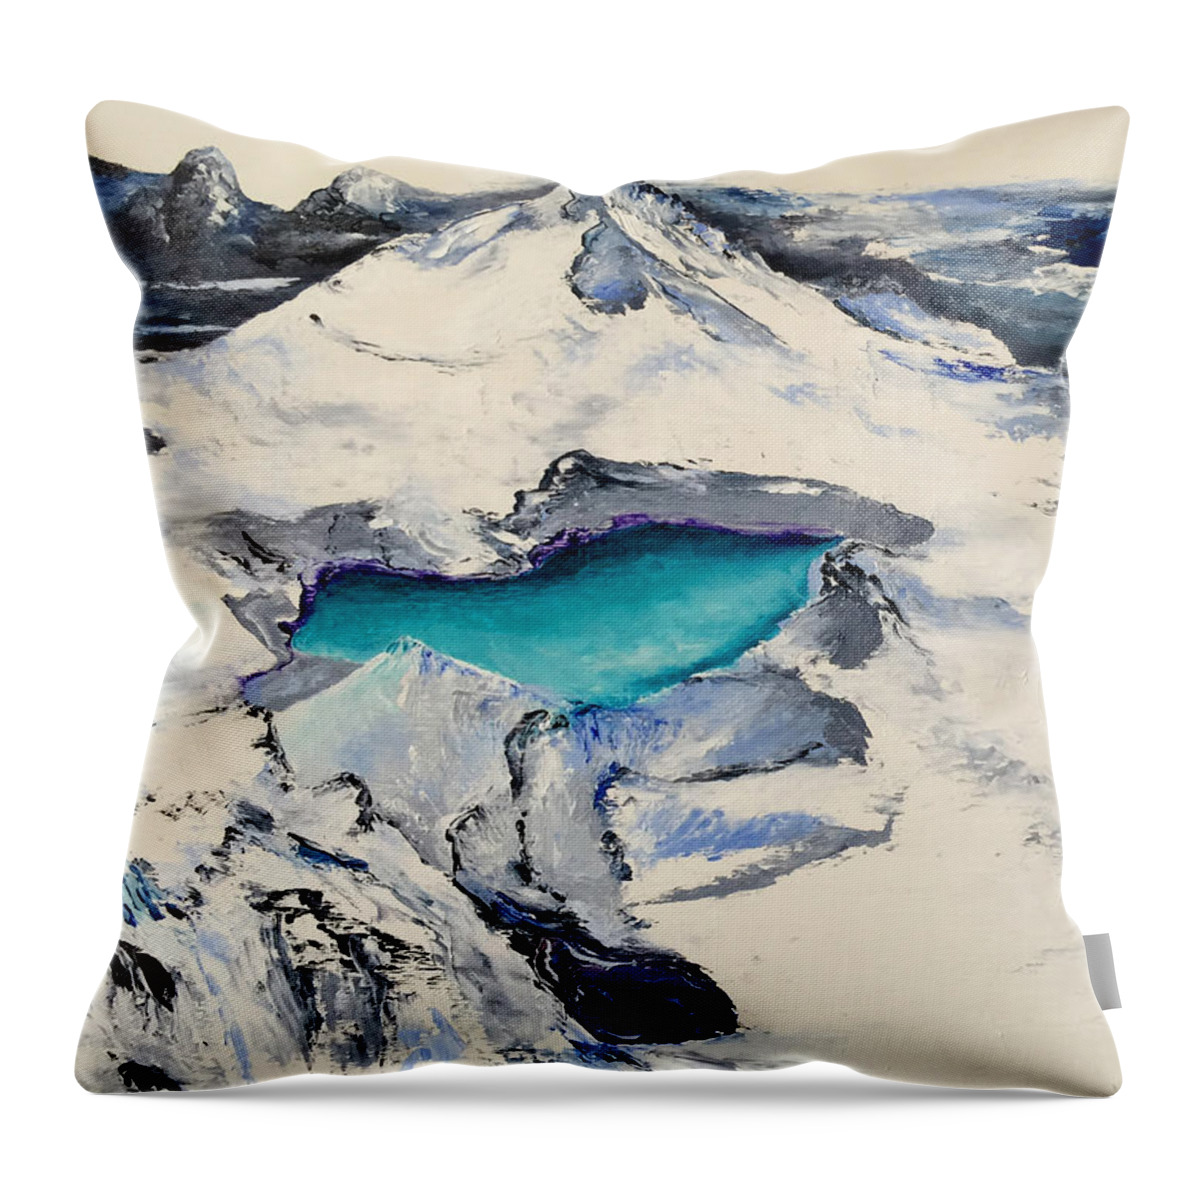 Landscape Throw Pillow featuring the painting Gemstone Lake by Terry R MacDonald